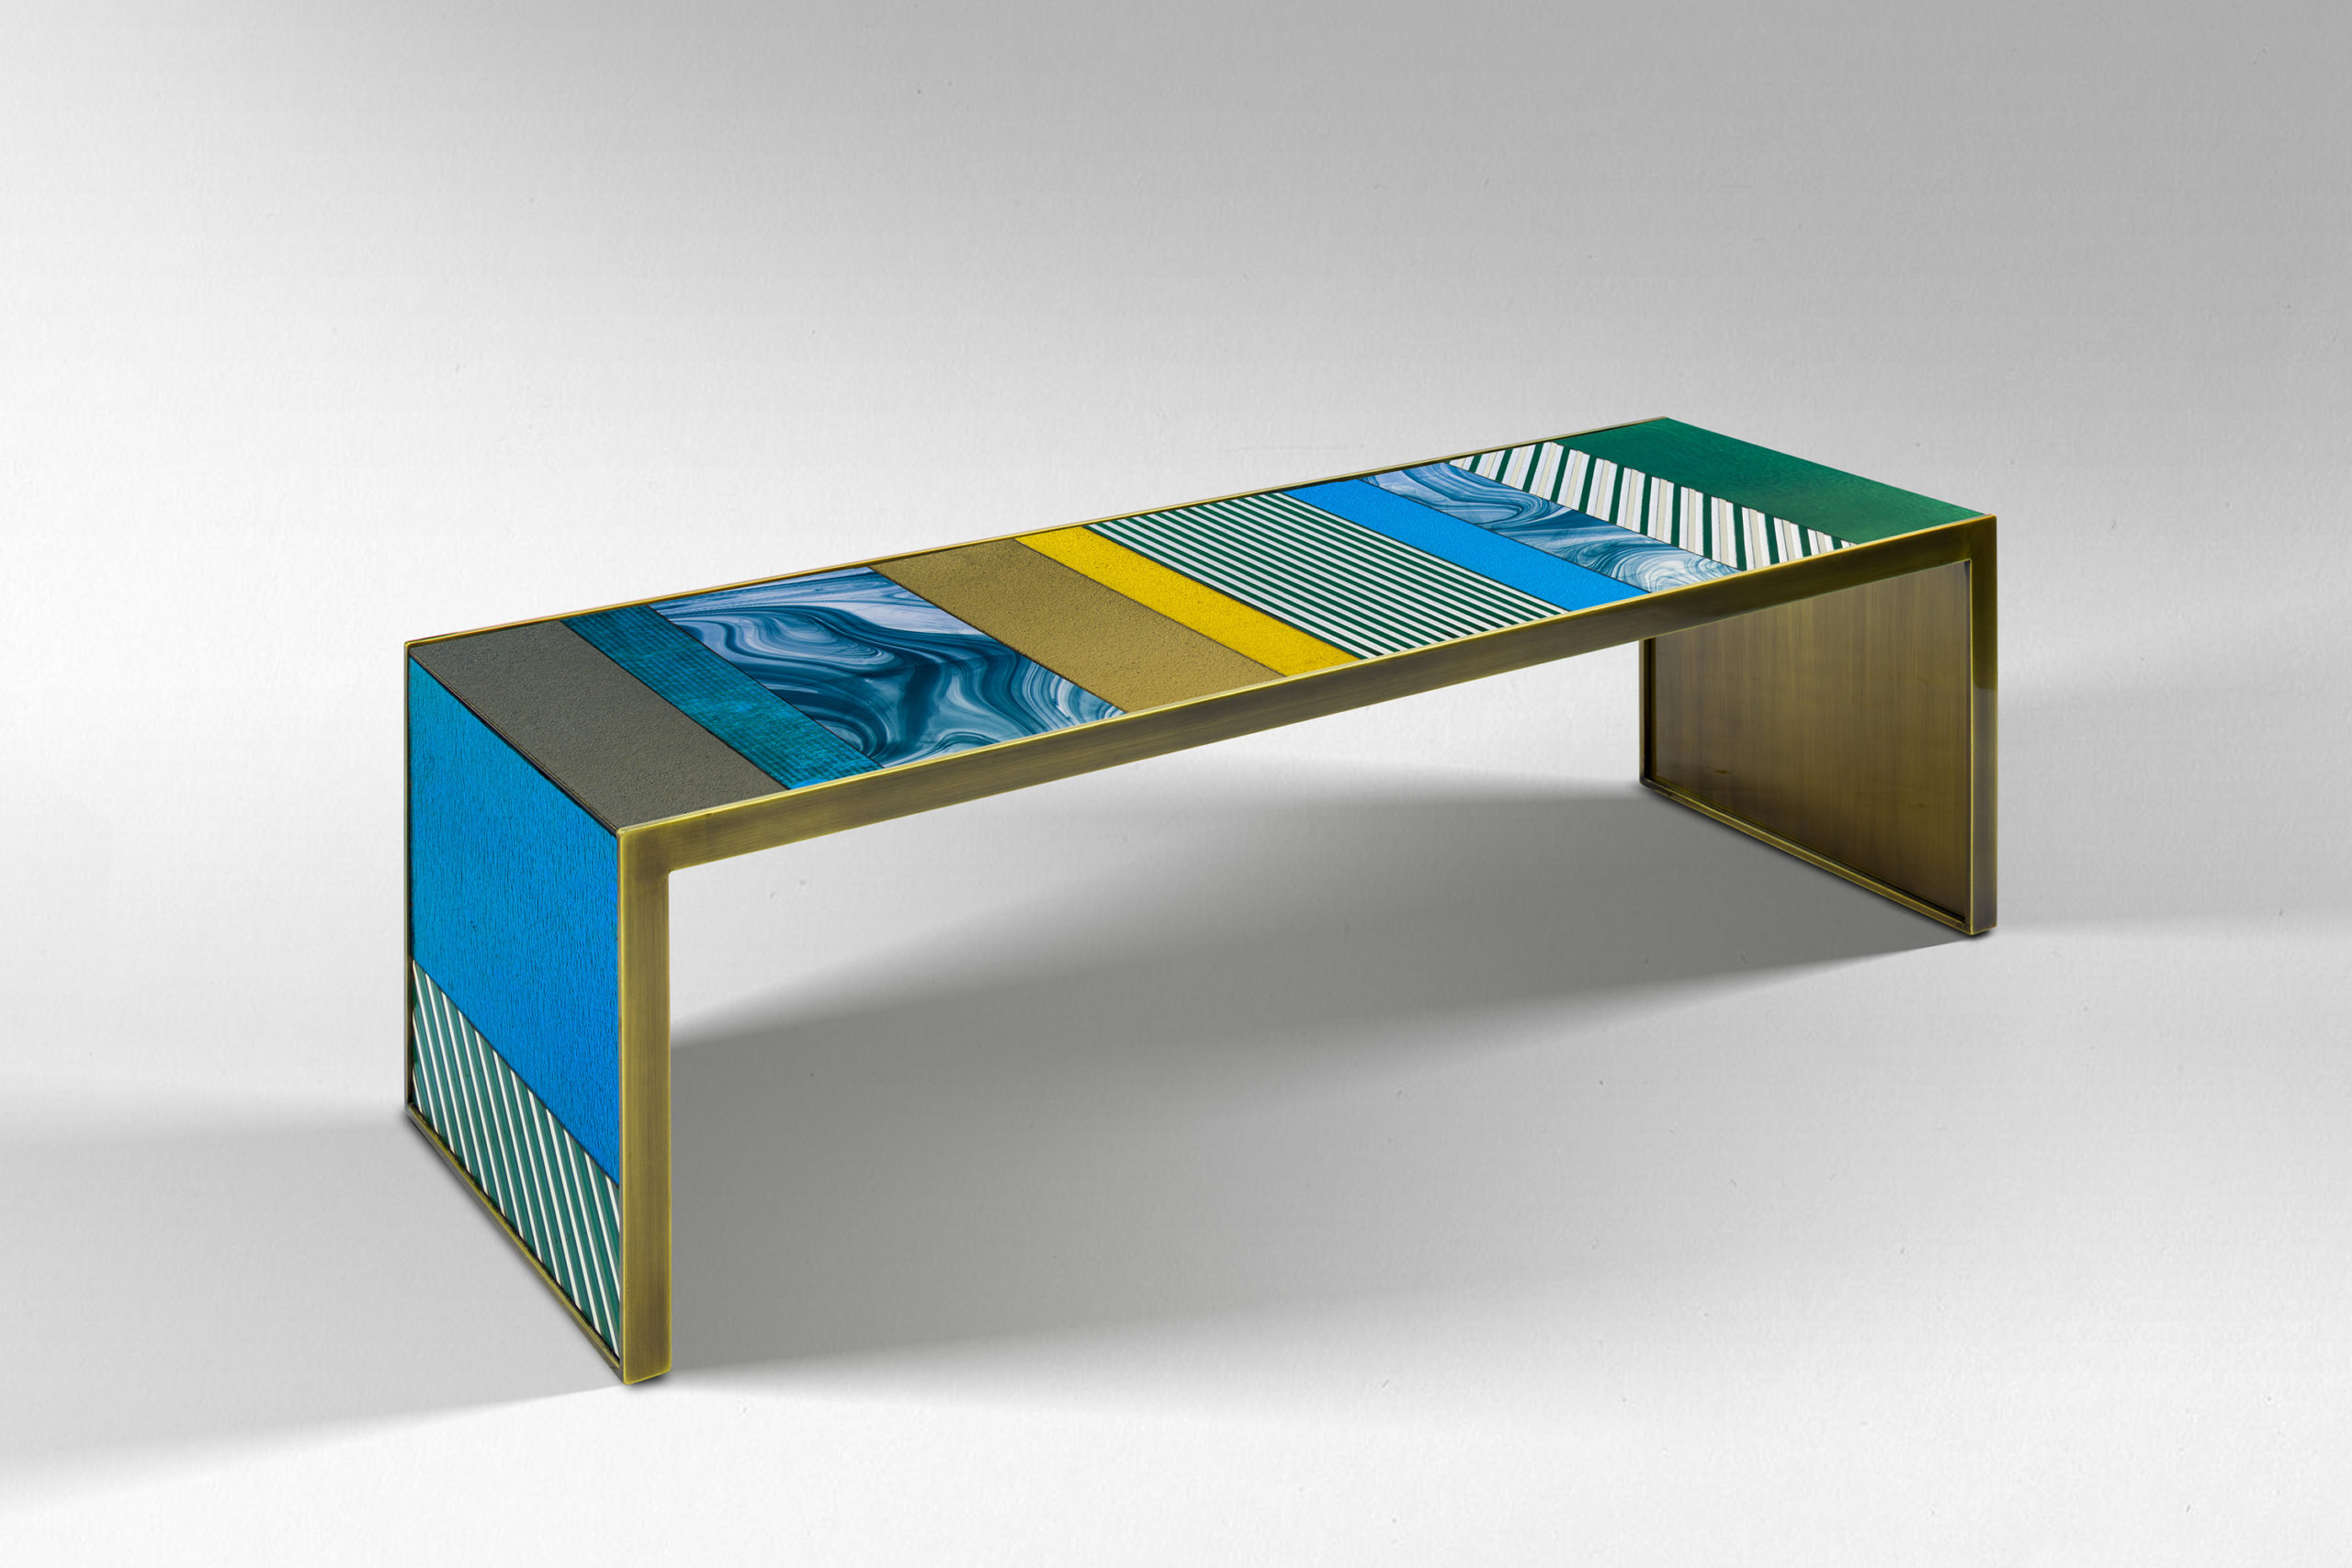 “Canal Grande” turquoise table